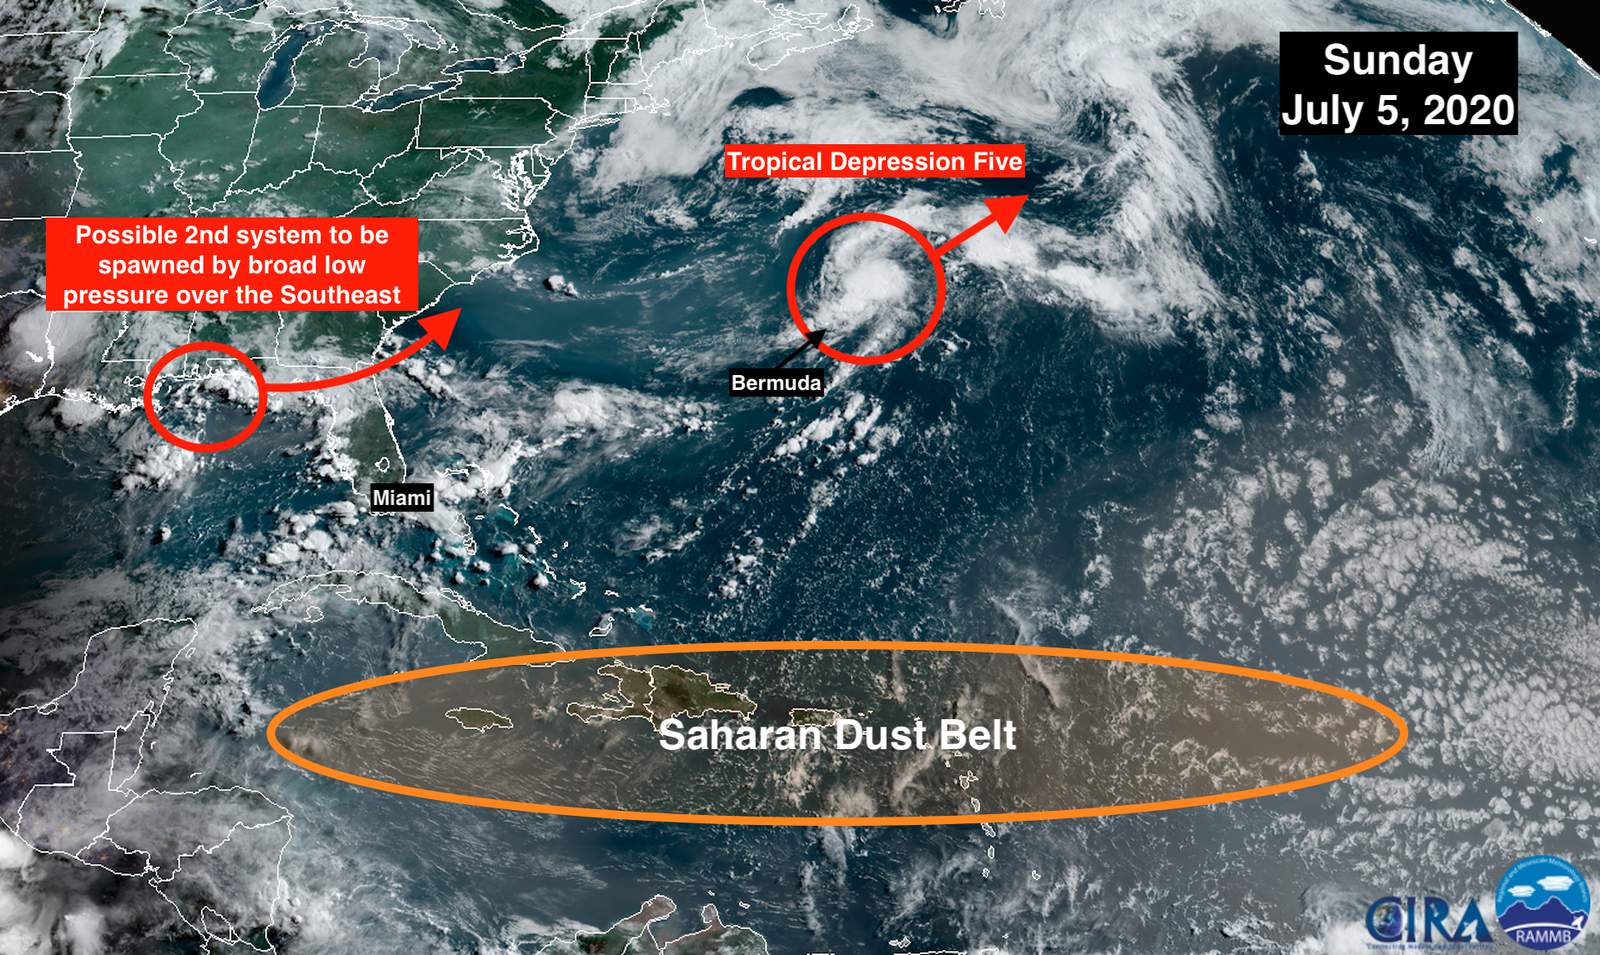 2 areas to watch but generally quiet tropics for now